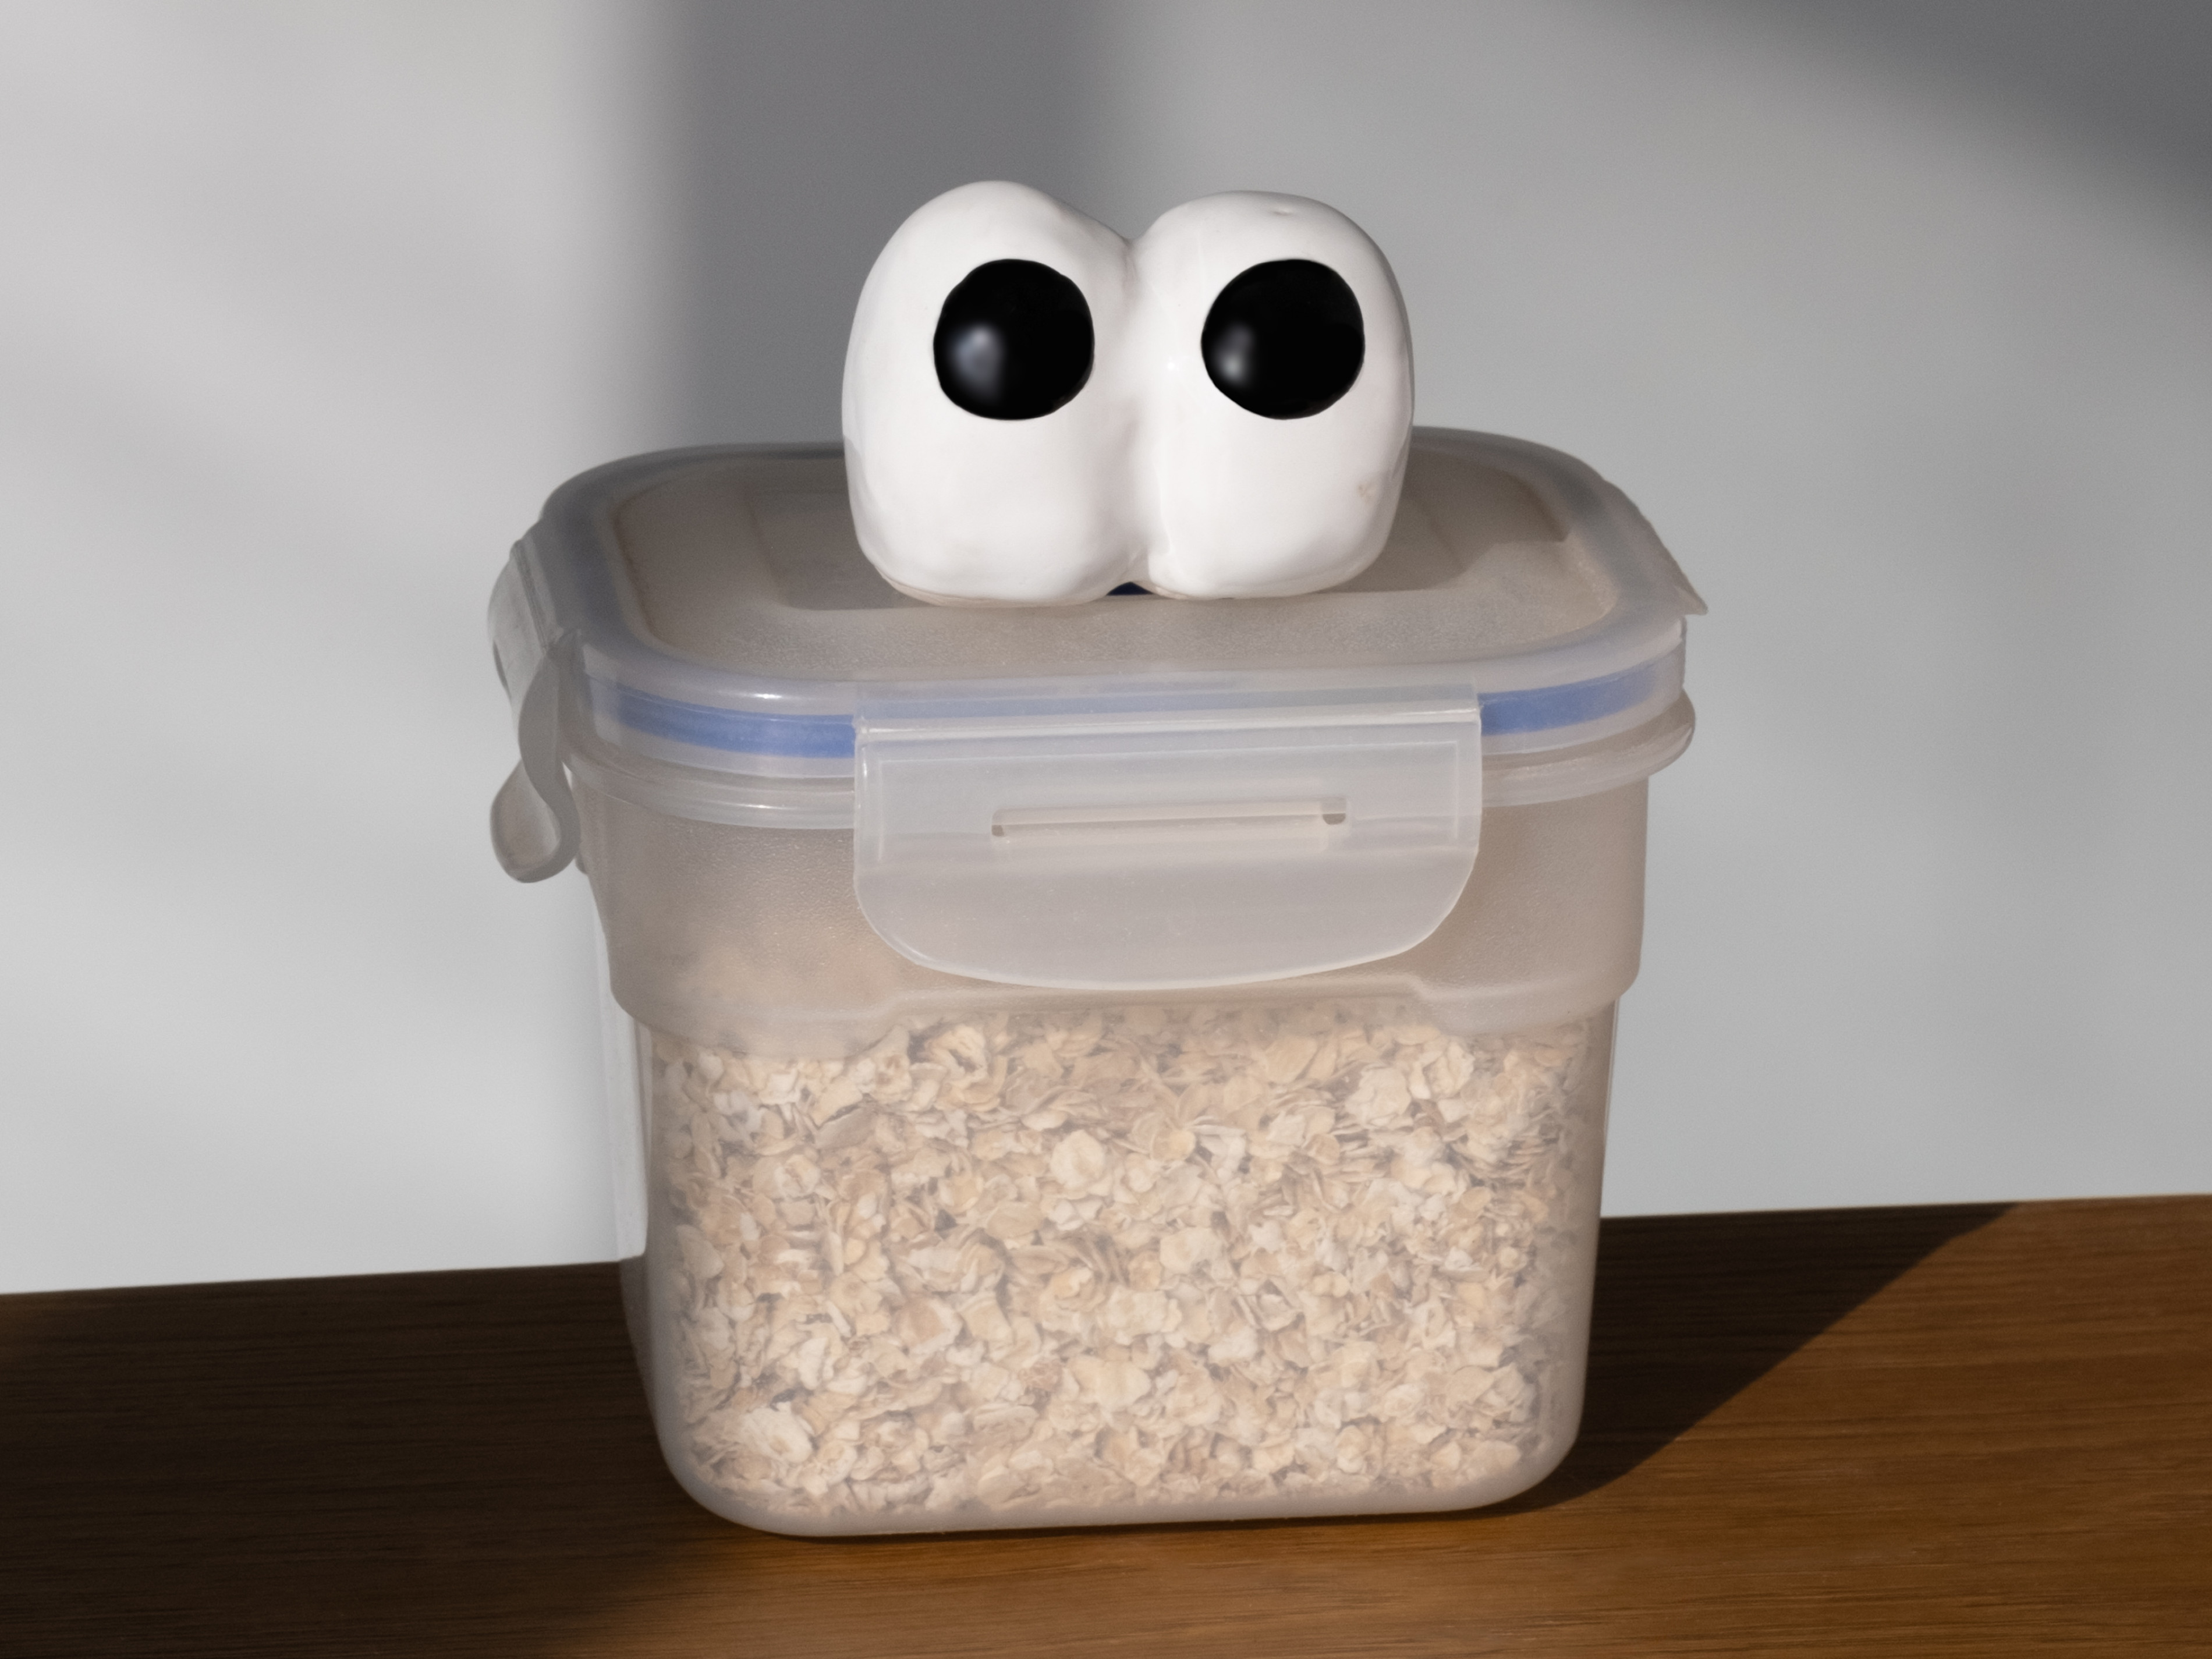 A pair of ceramic eyes standing on top of a transparent plastic container